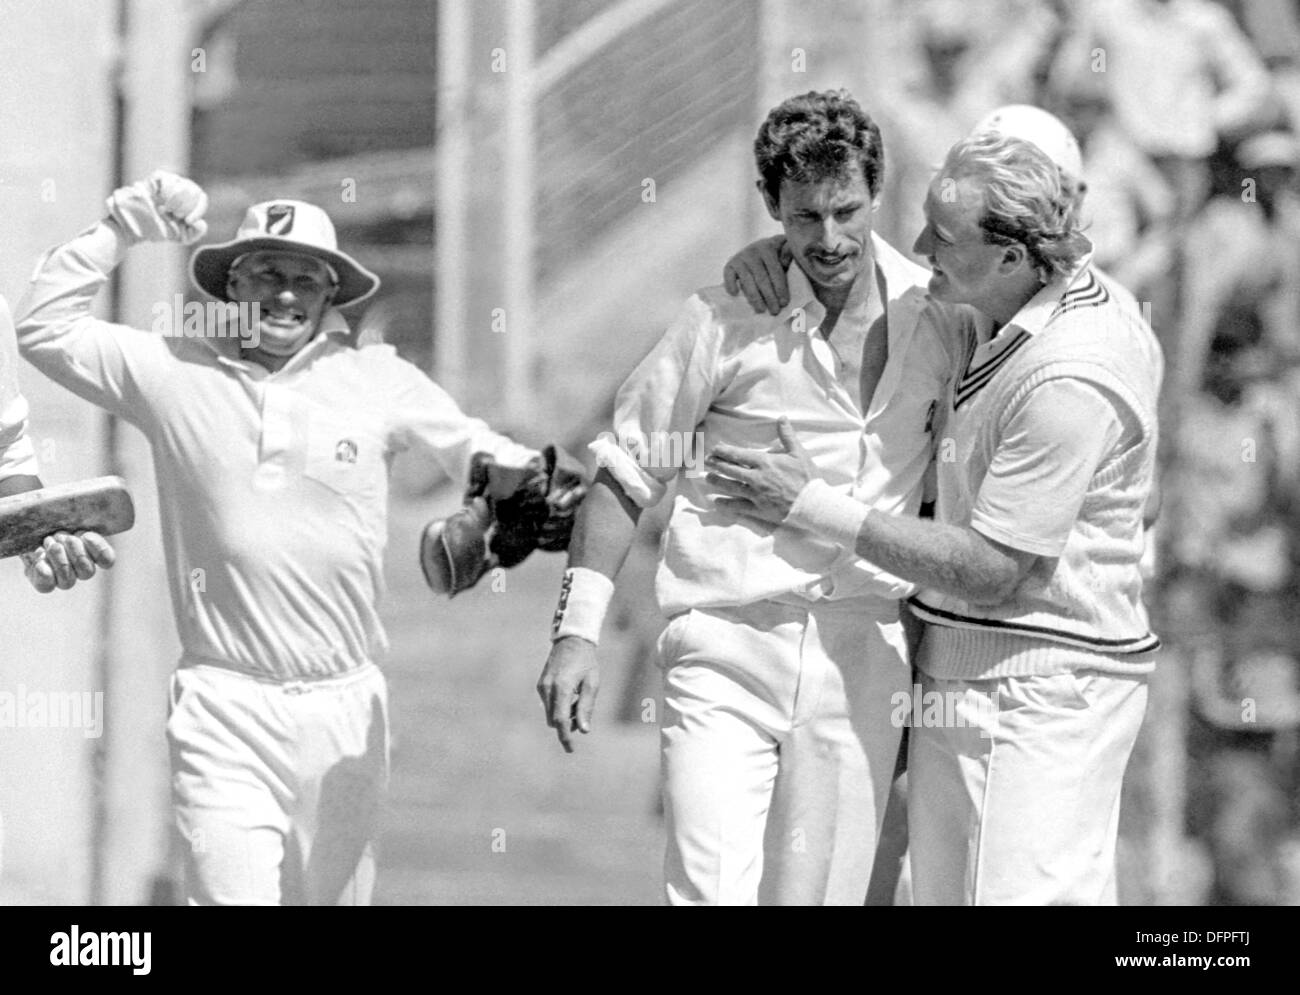 New Zealand bowler Richard Hadlee is congratulated by teammates after Hadlee broke the record for the most Test wickets during the first test between India and New Zealand November 12, 1988 in Bangalore, India. Stock Photo